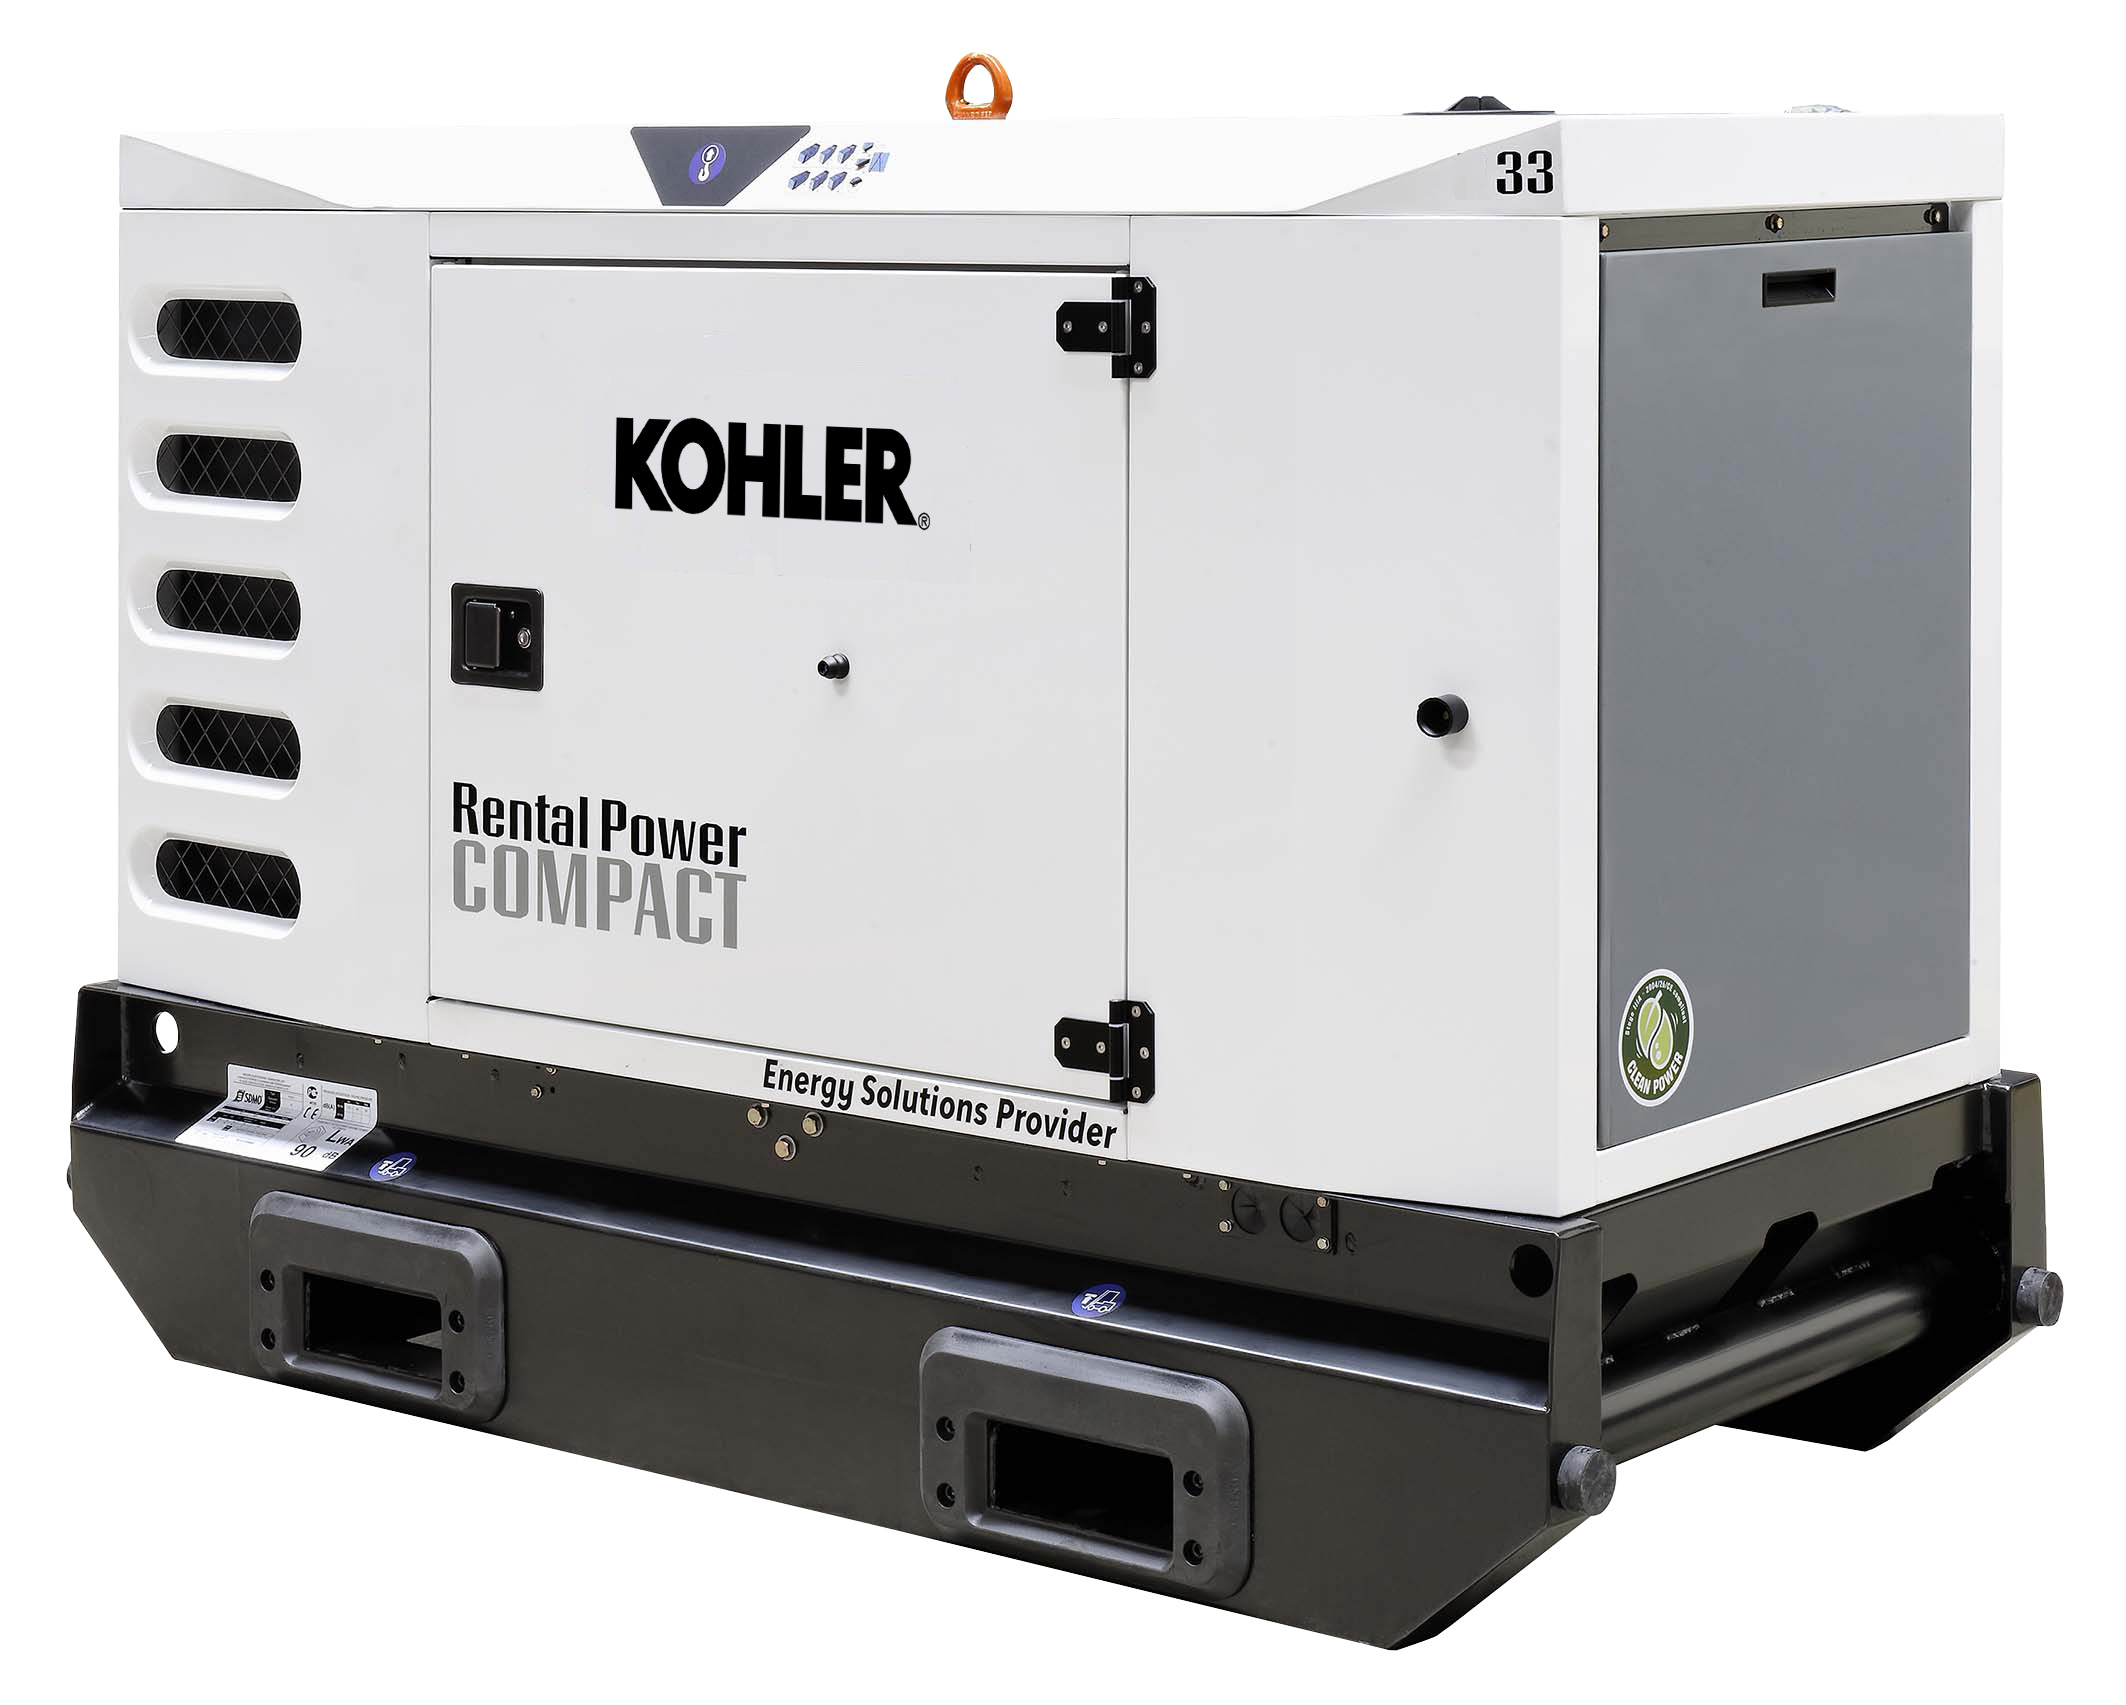 R66KC3 powergen generators for event and rental companies